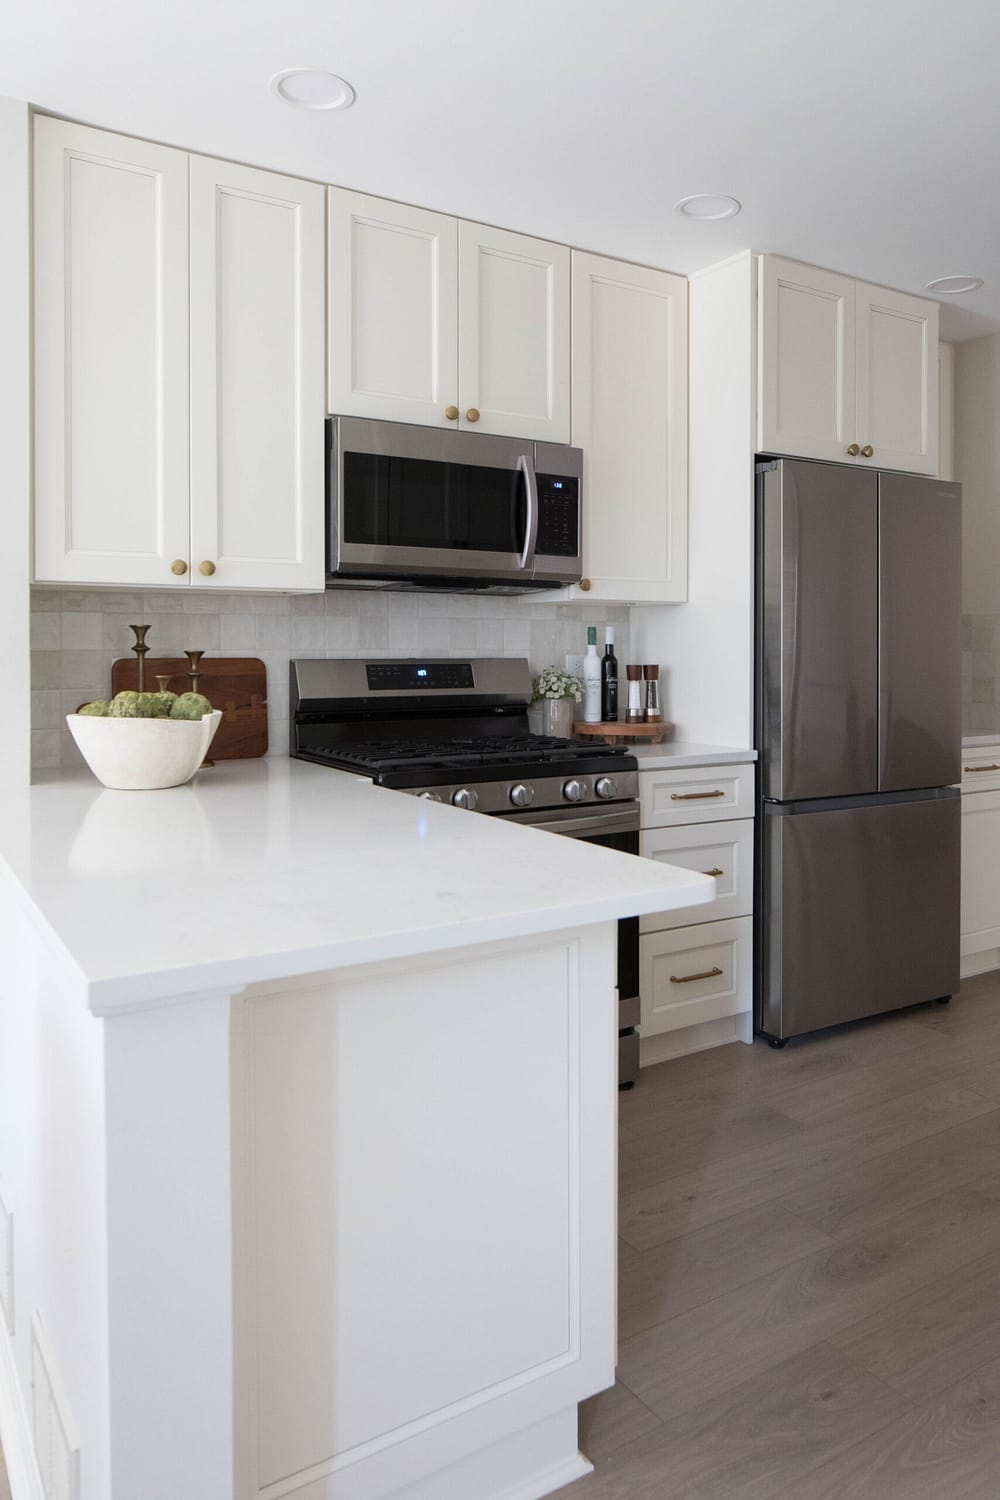 Apartment kitchen with white cabinets and quartz countertops